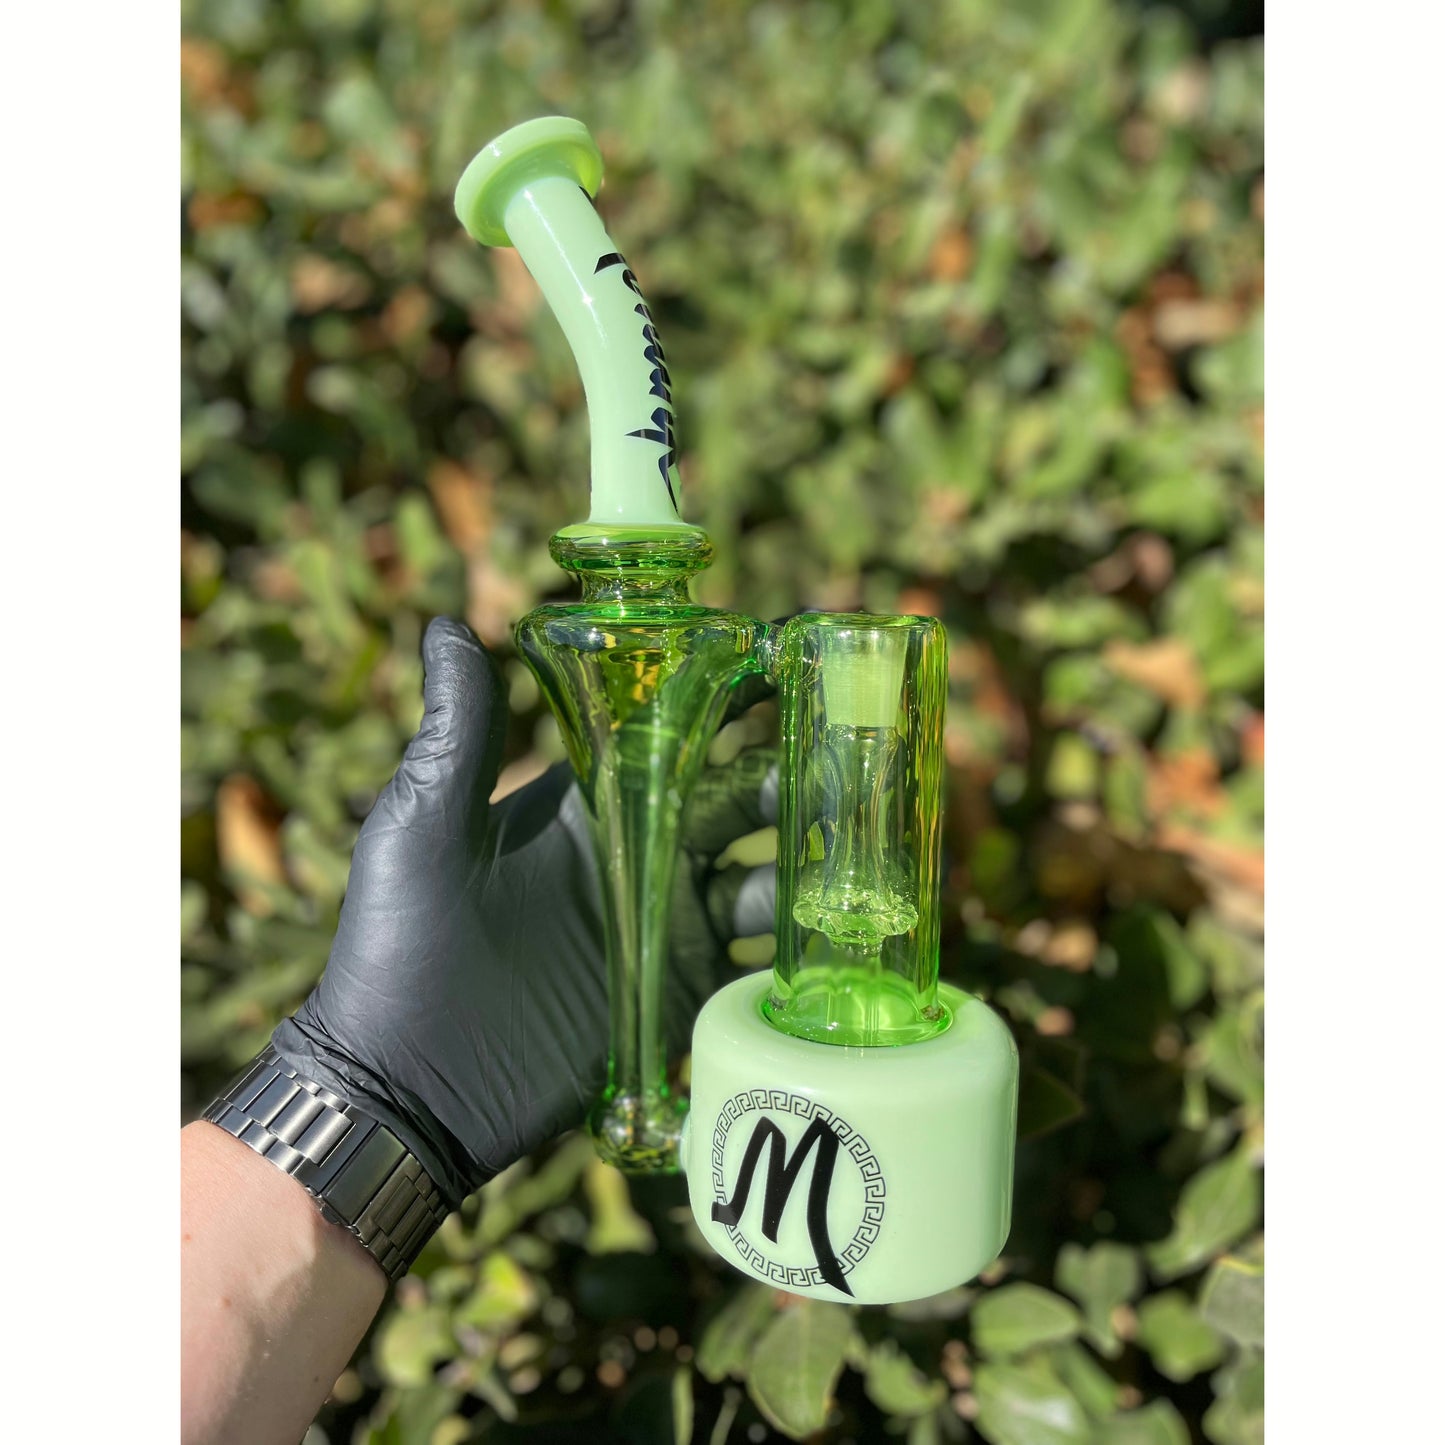 New Full color vortex Recycler Dab Rig.